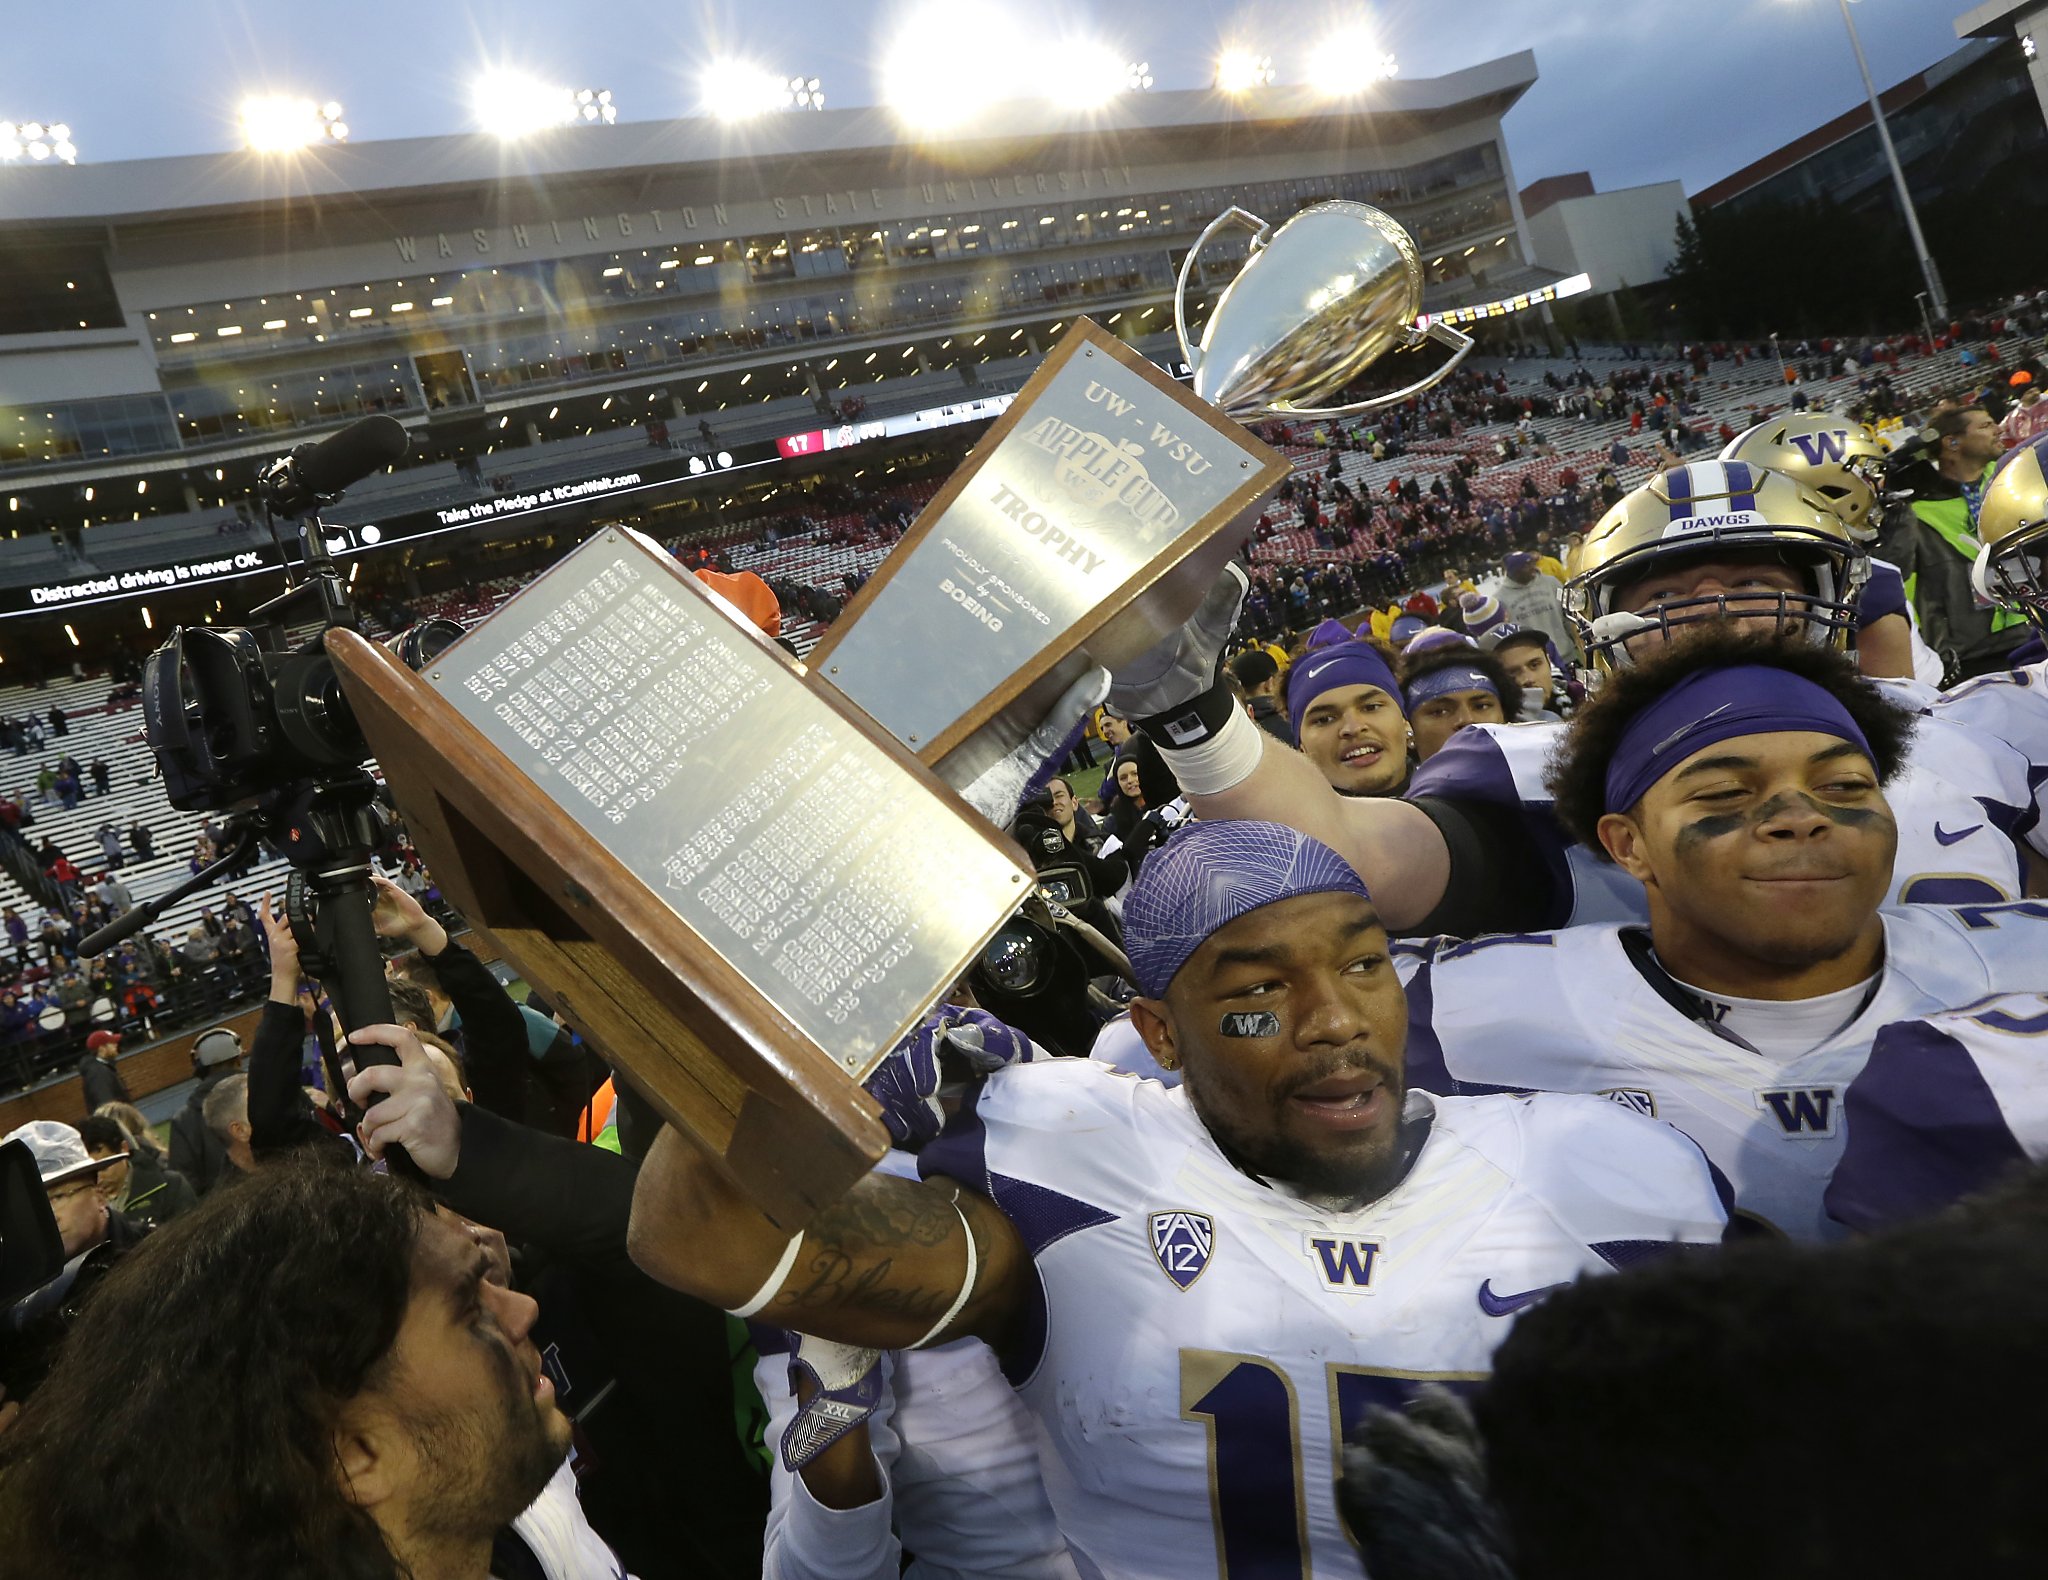 Washington’s Apple Cup will draw plenty of attention in California SFGate